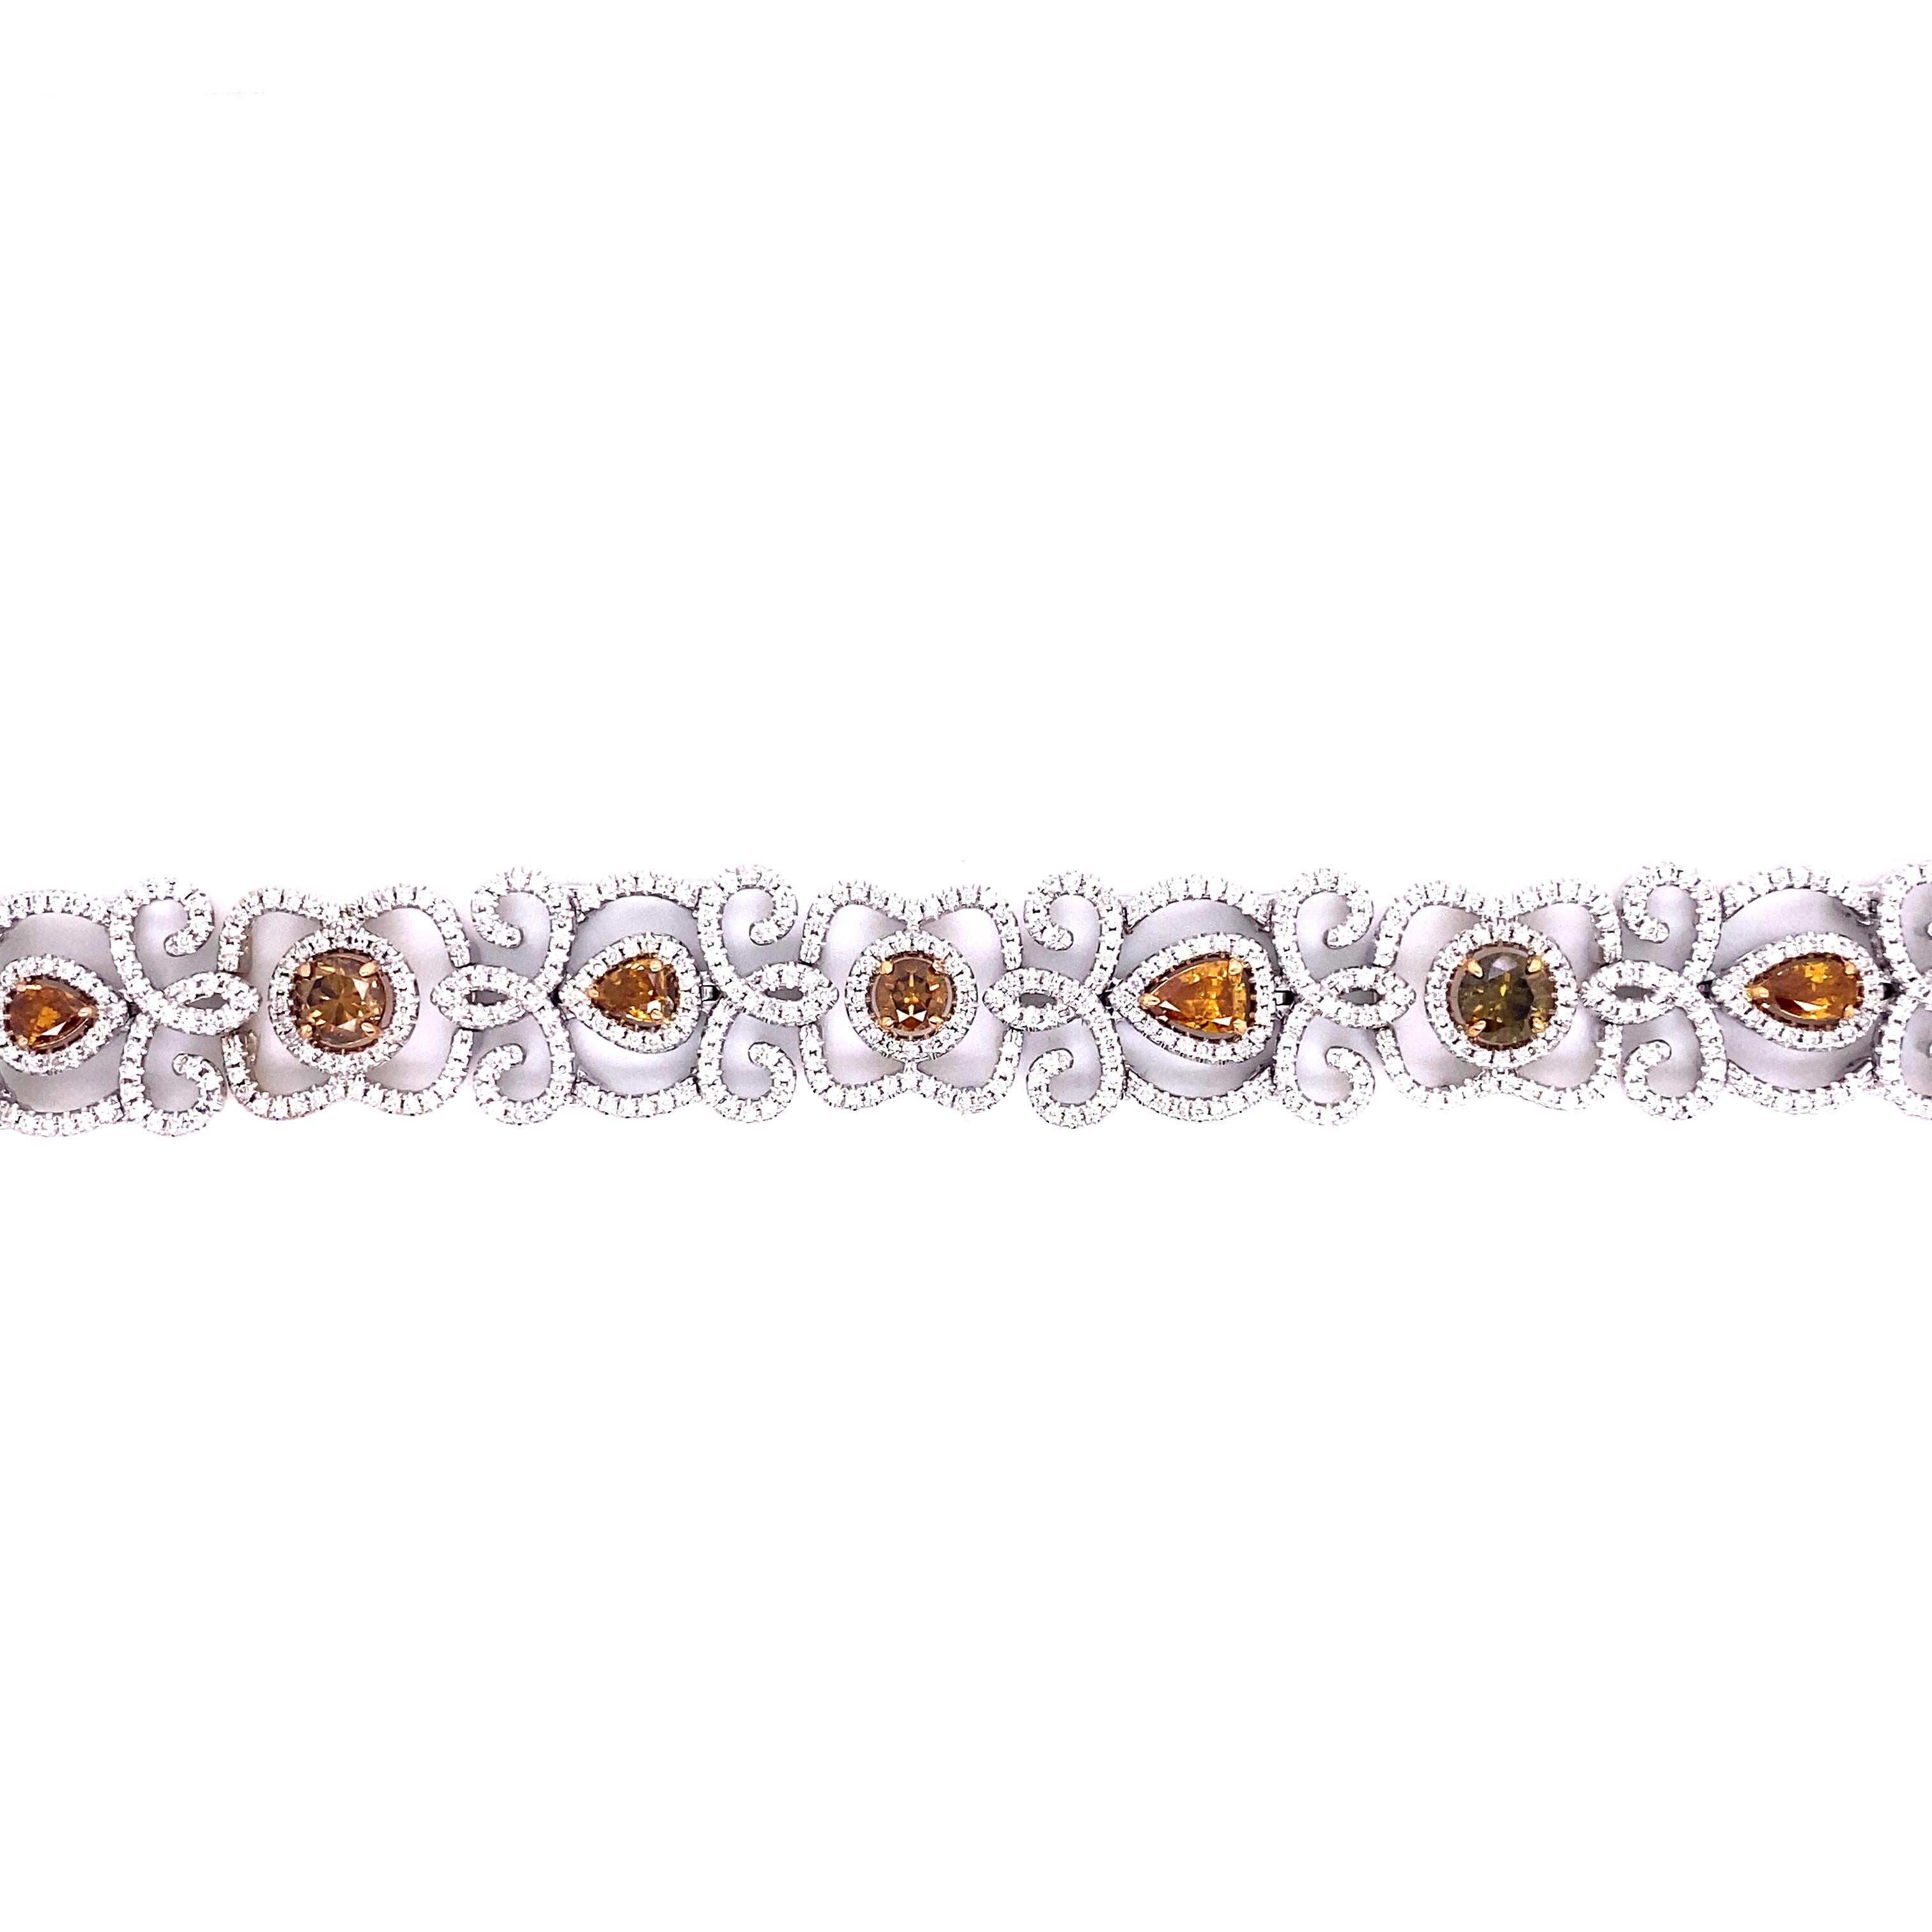 Colored Diamond and White Diamond Bracelet 

This unique bracelet features 4.11 carats of colored diamonds from champagne to deep orange hues all set with prongs in 18 karat yellow gold. Each colored diamond is surrounded by a whimsical pattern of